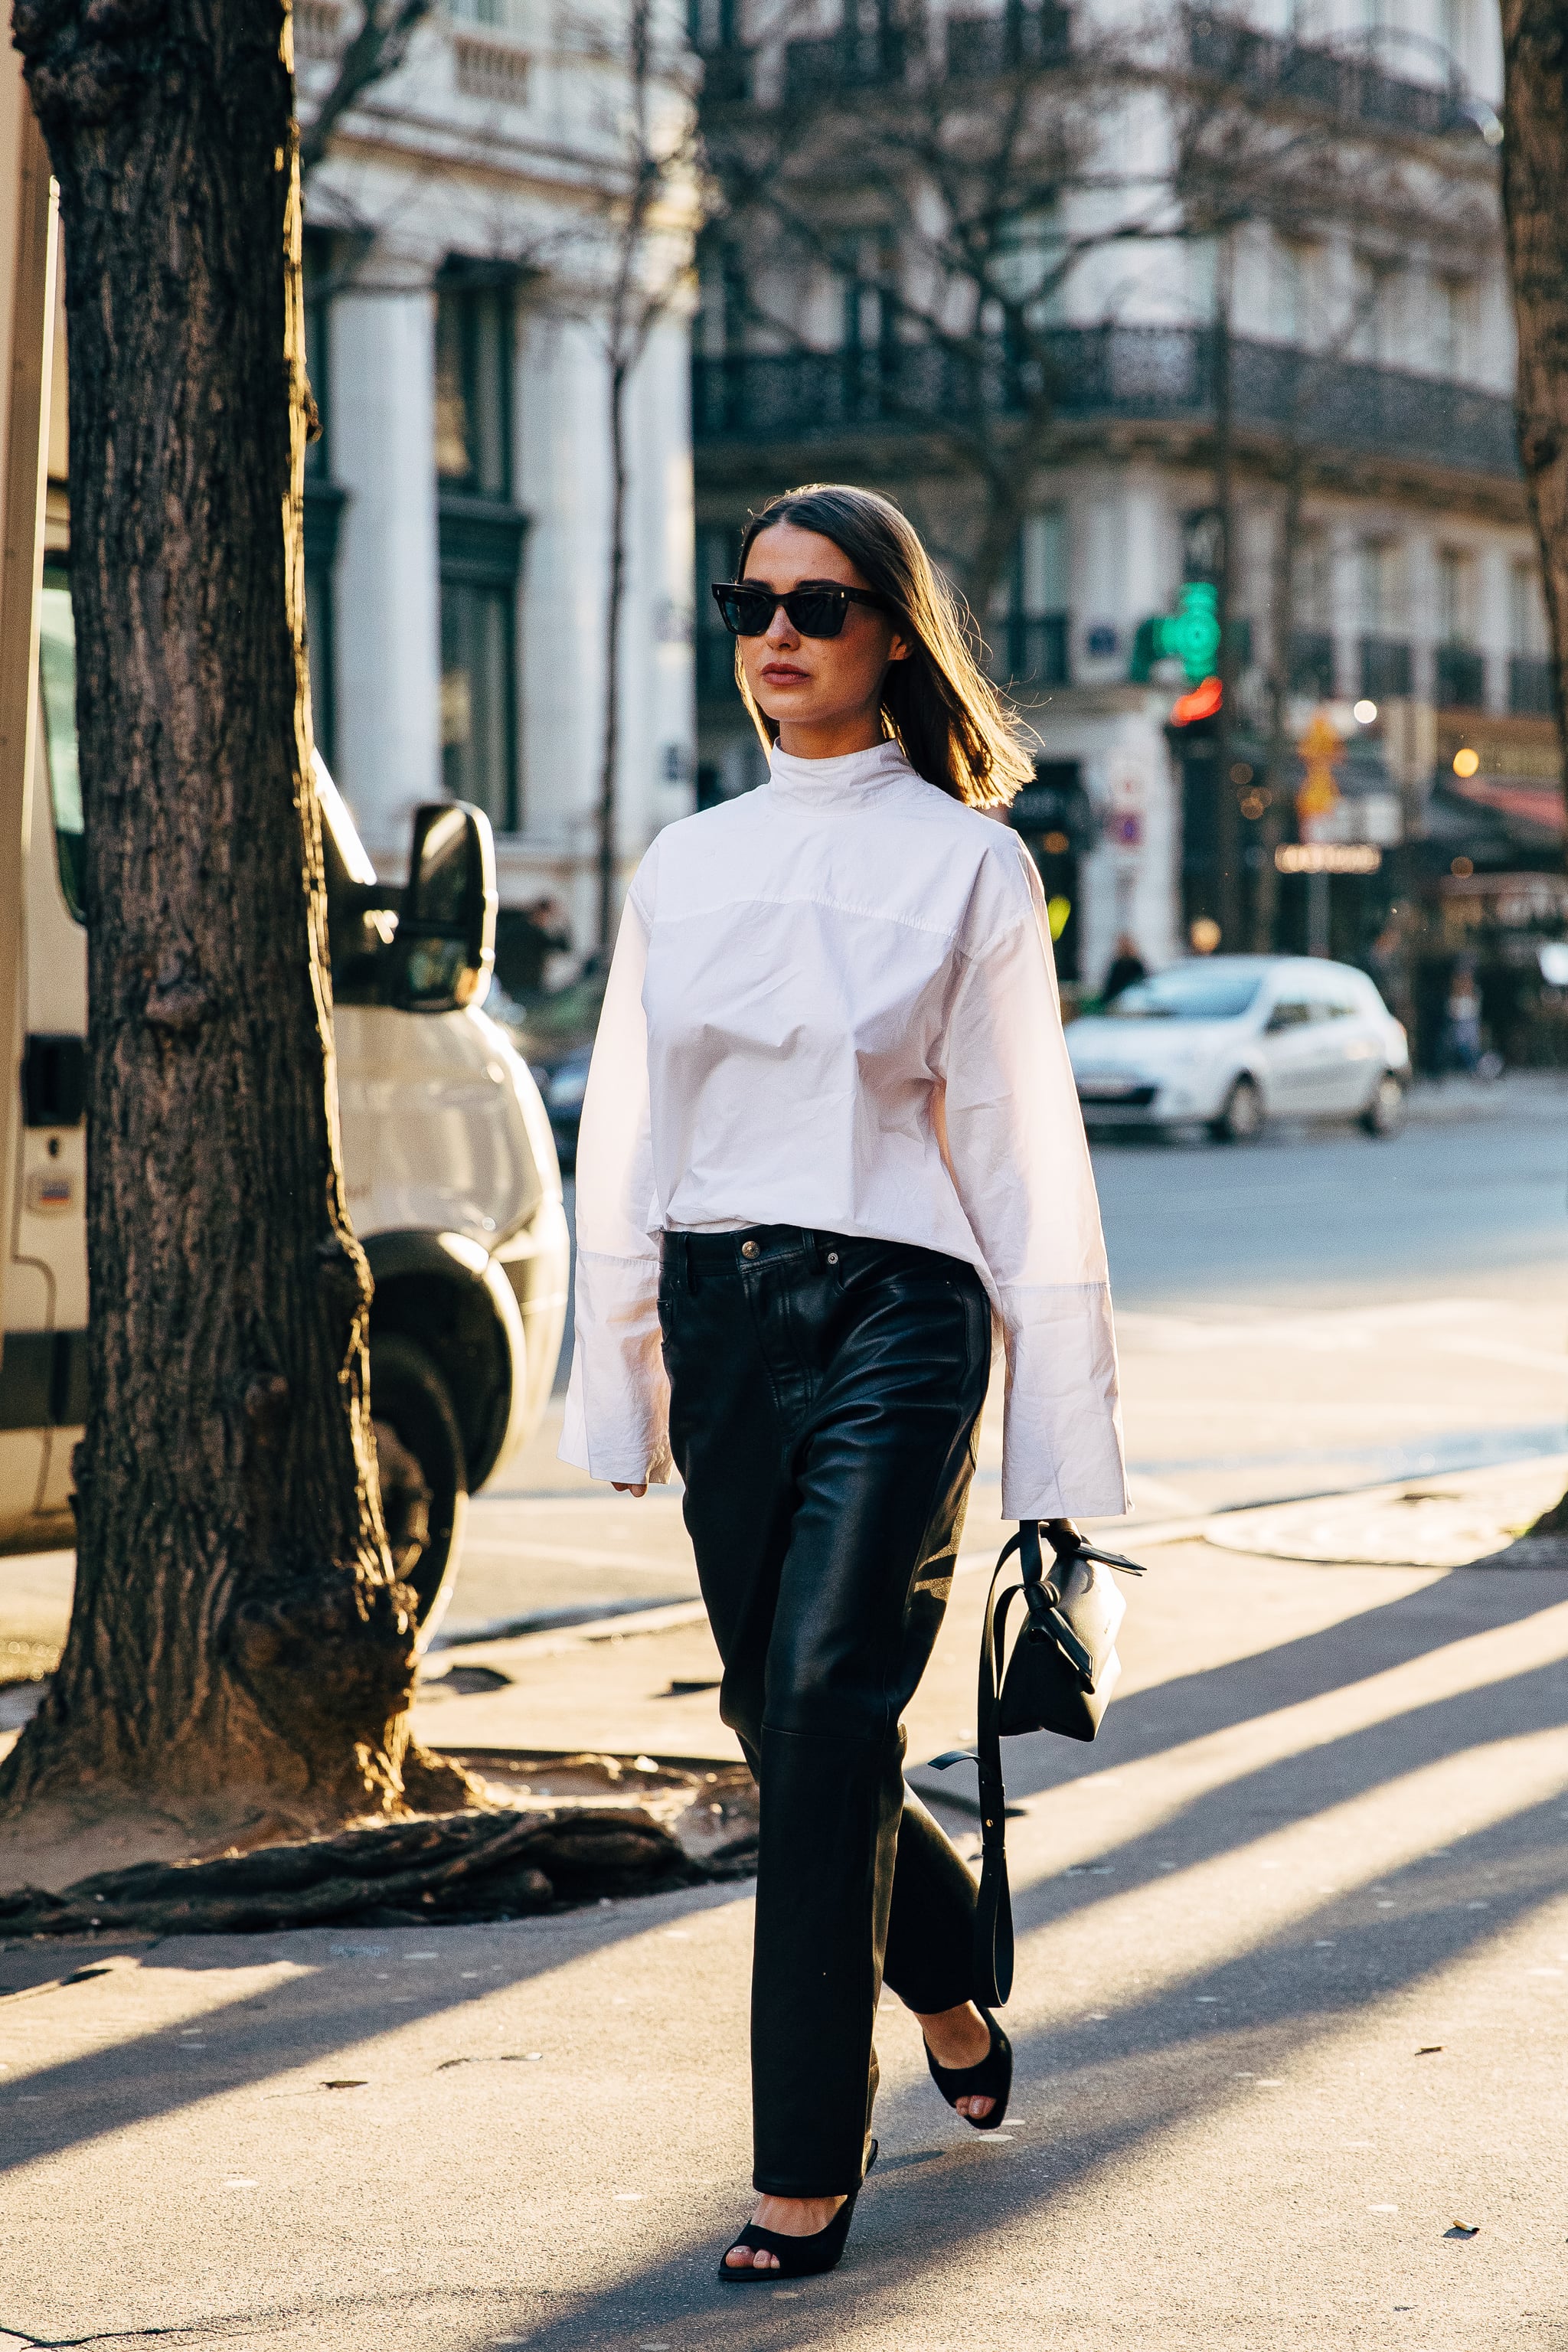 How to wear a dress over pants on Pinterest